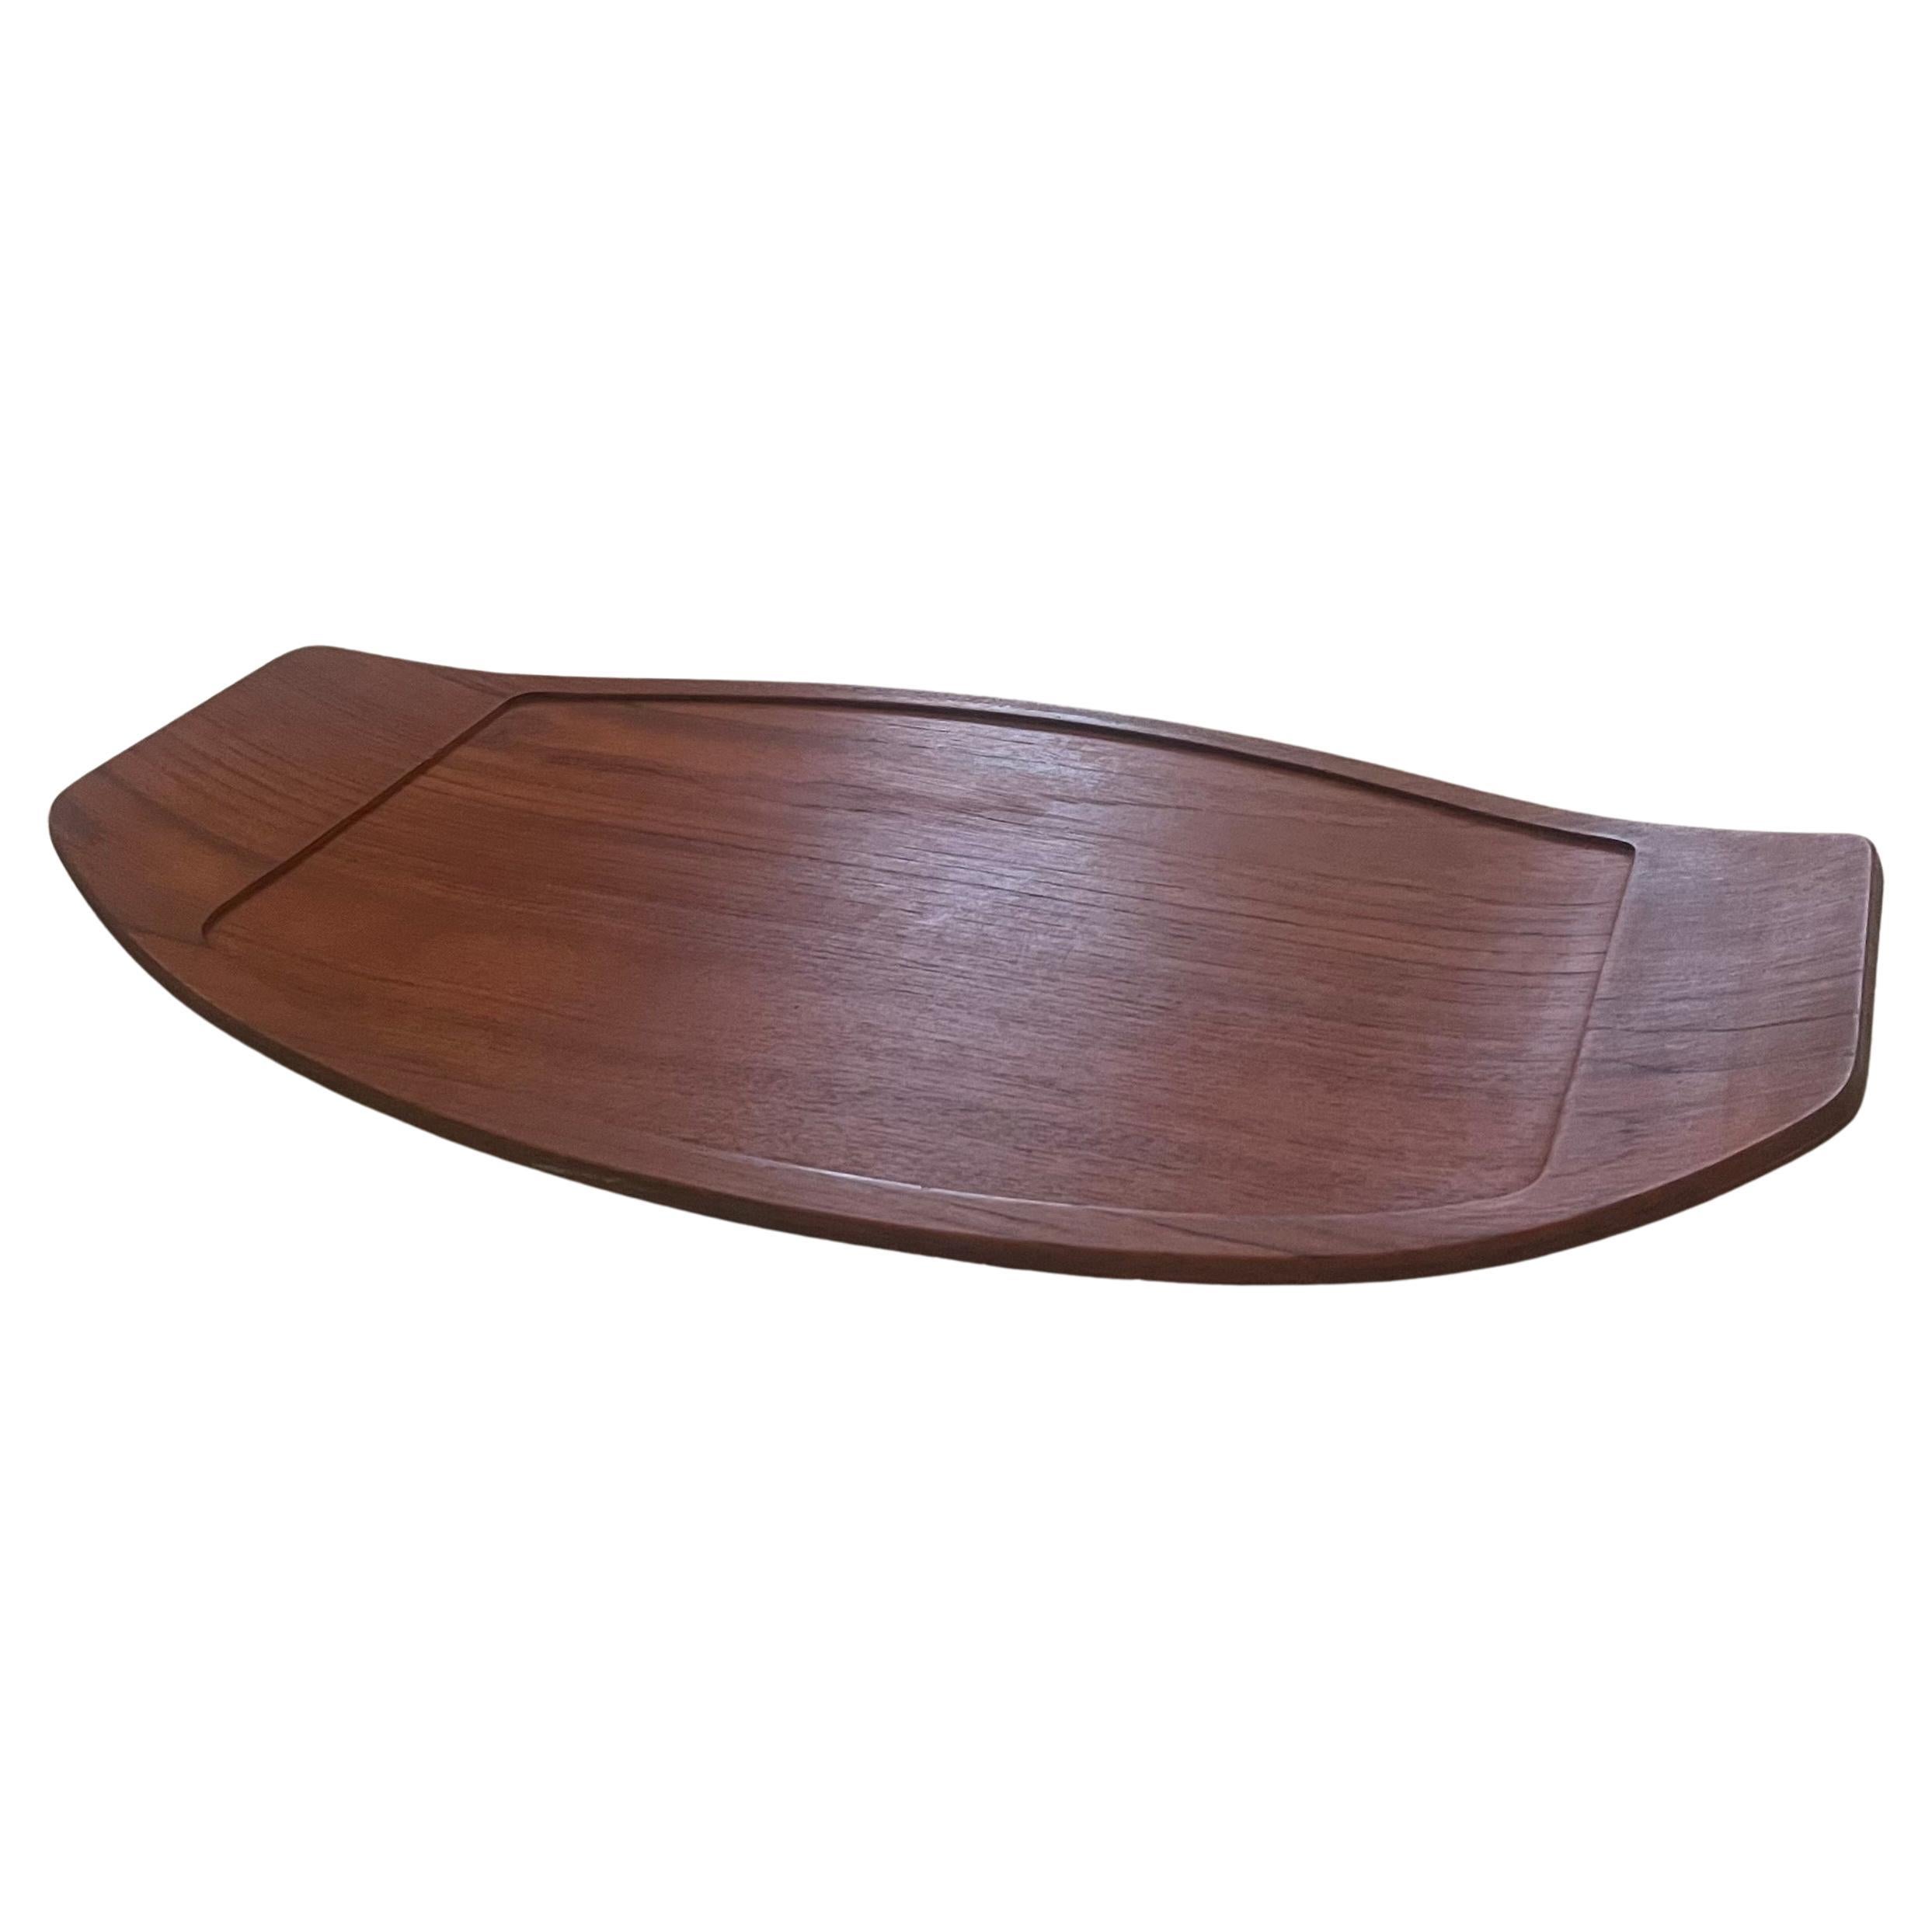 Large Solid Teak Surfboard Tray with Raised Edge by Digsmed - Rare For Sale